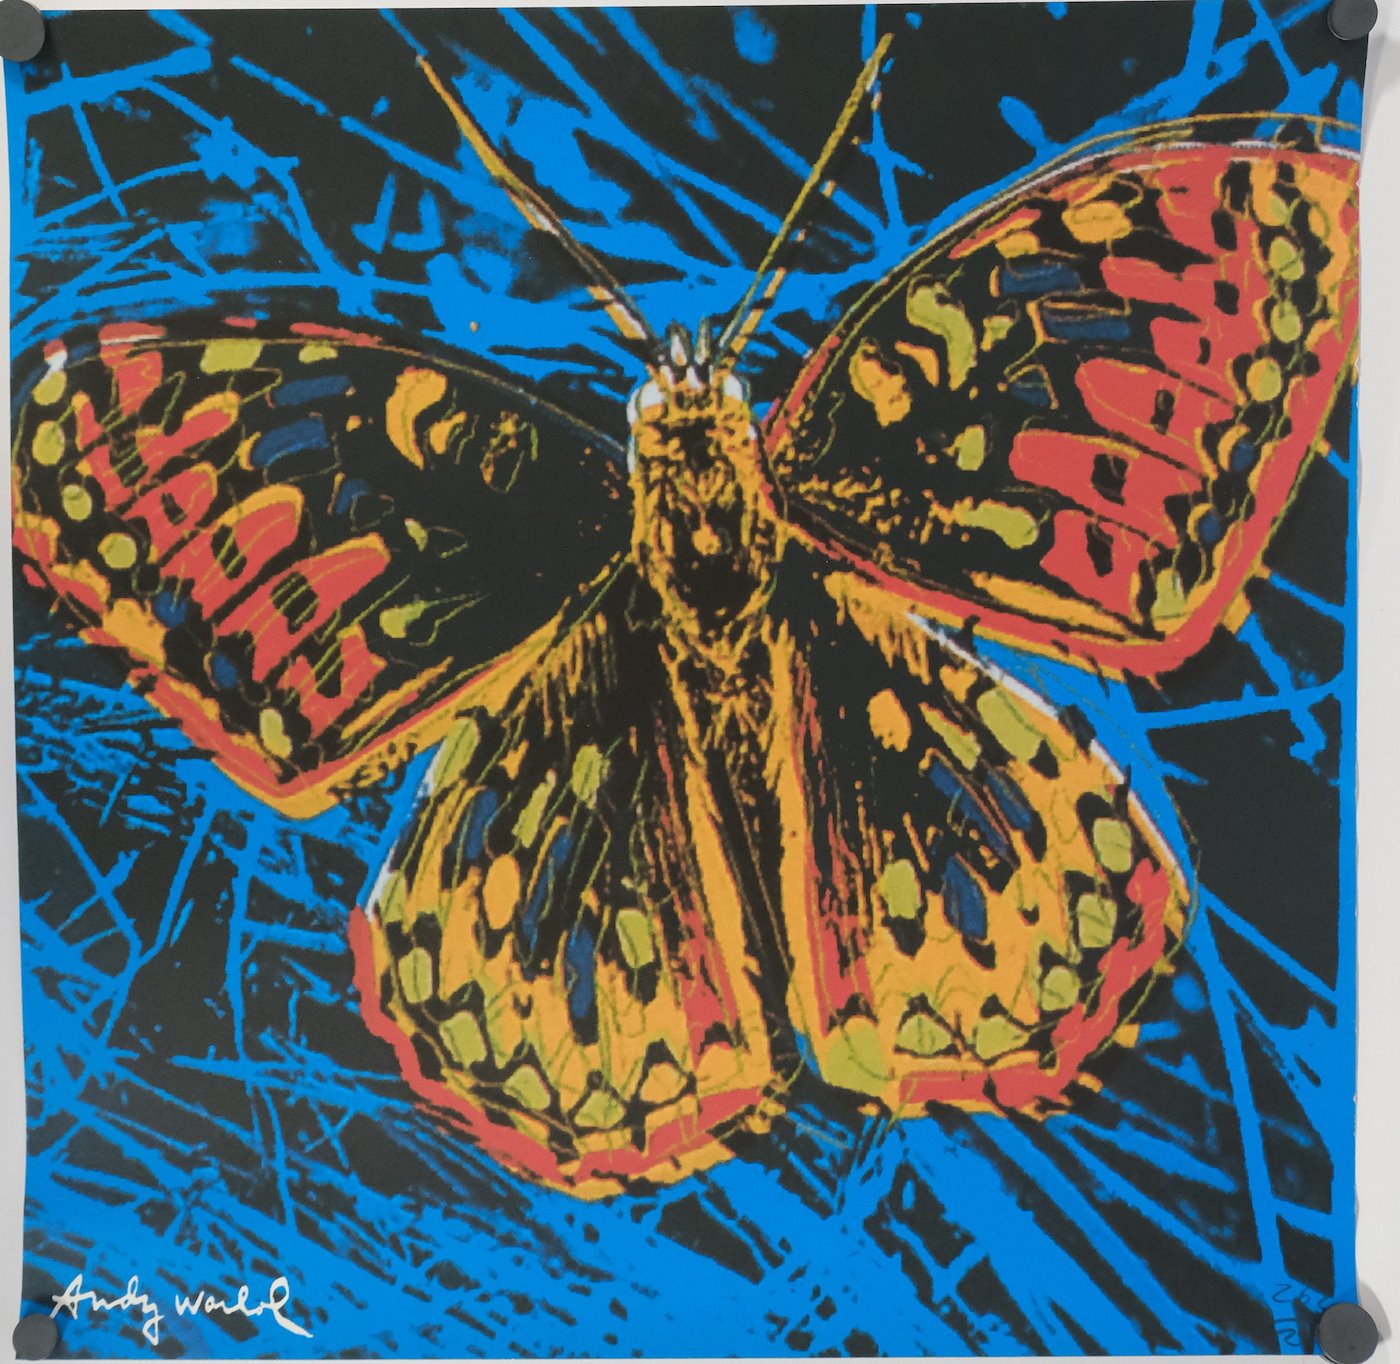 Andy Warhol - Butterfly